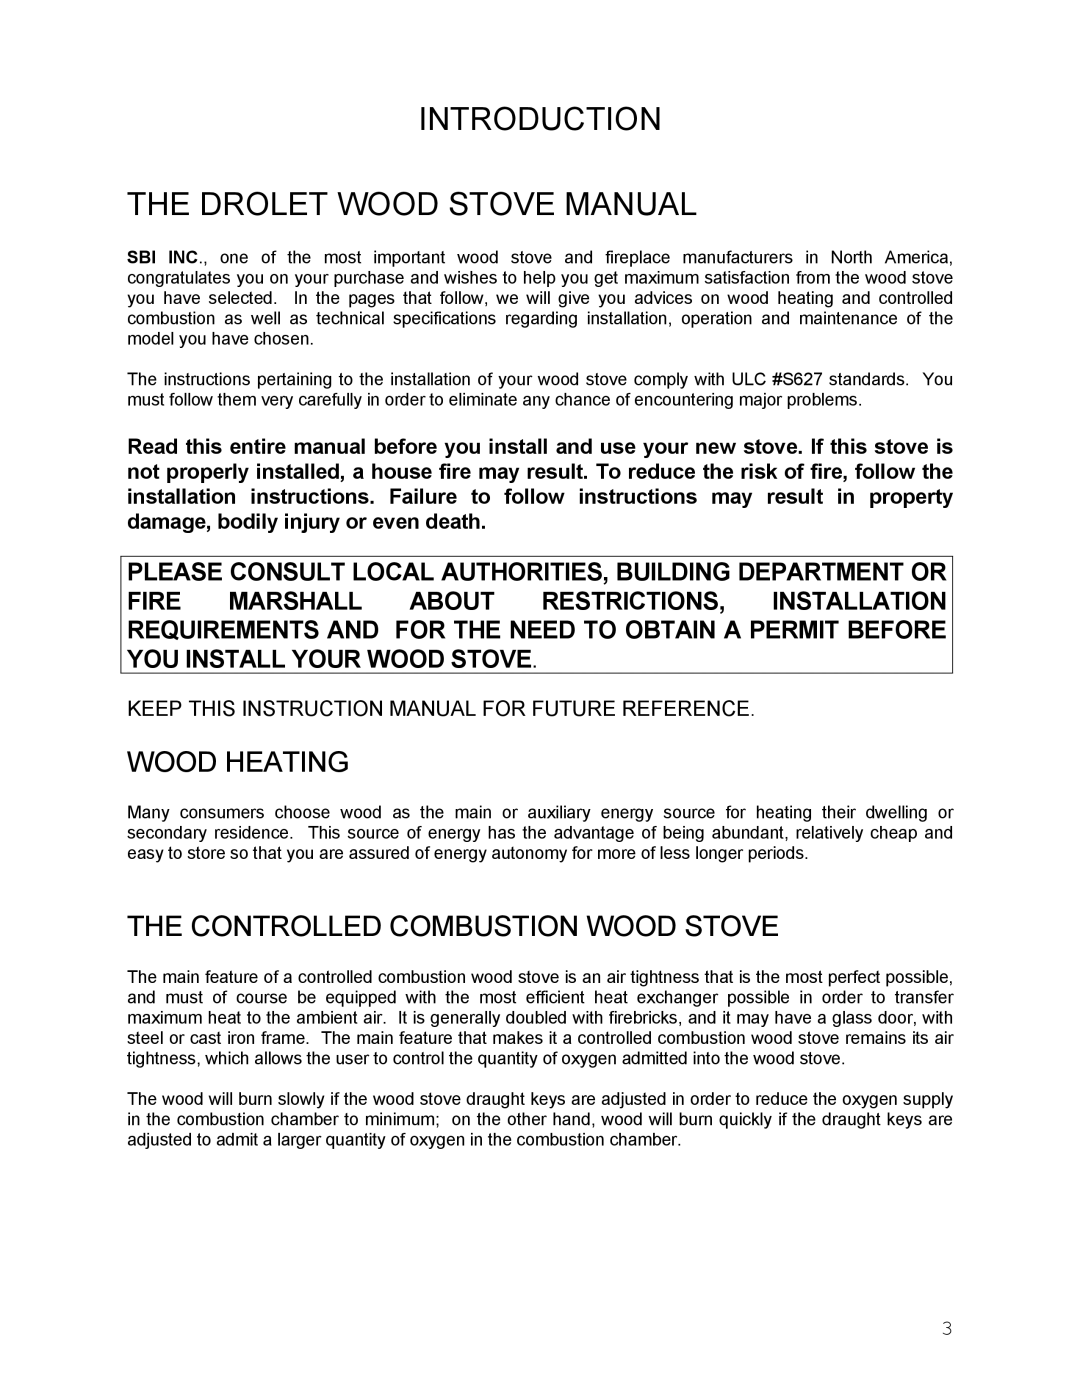 Drolet manual Wood Heating, Controlled Combustion Wood Stove 